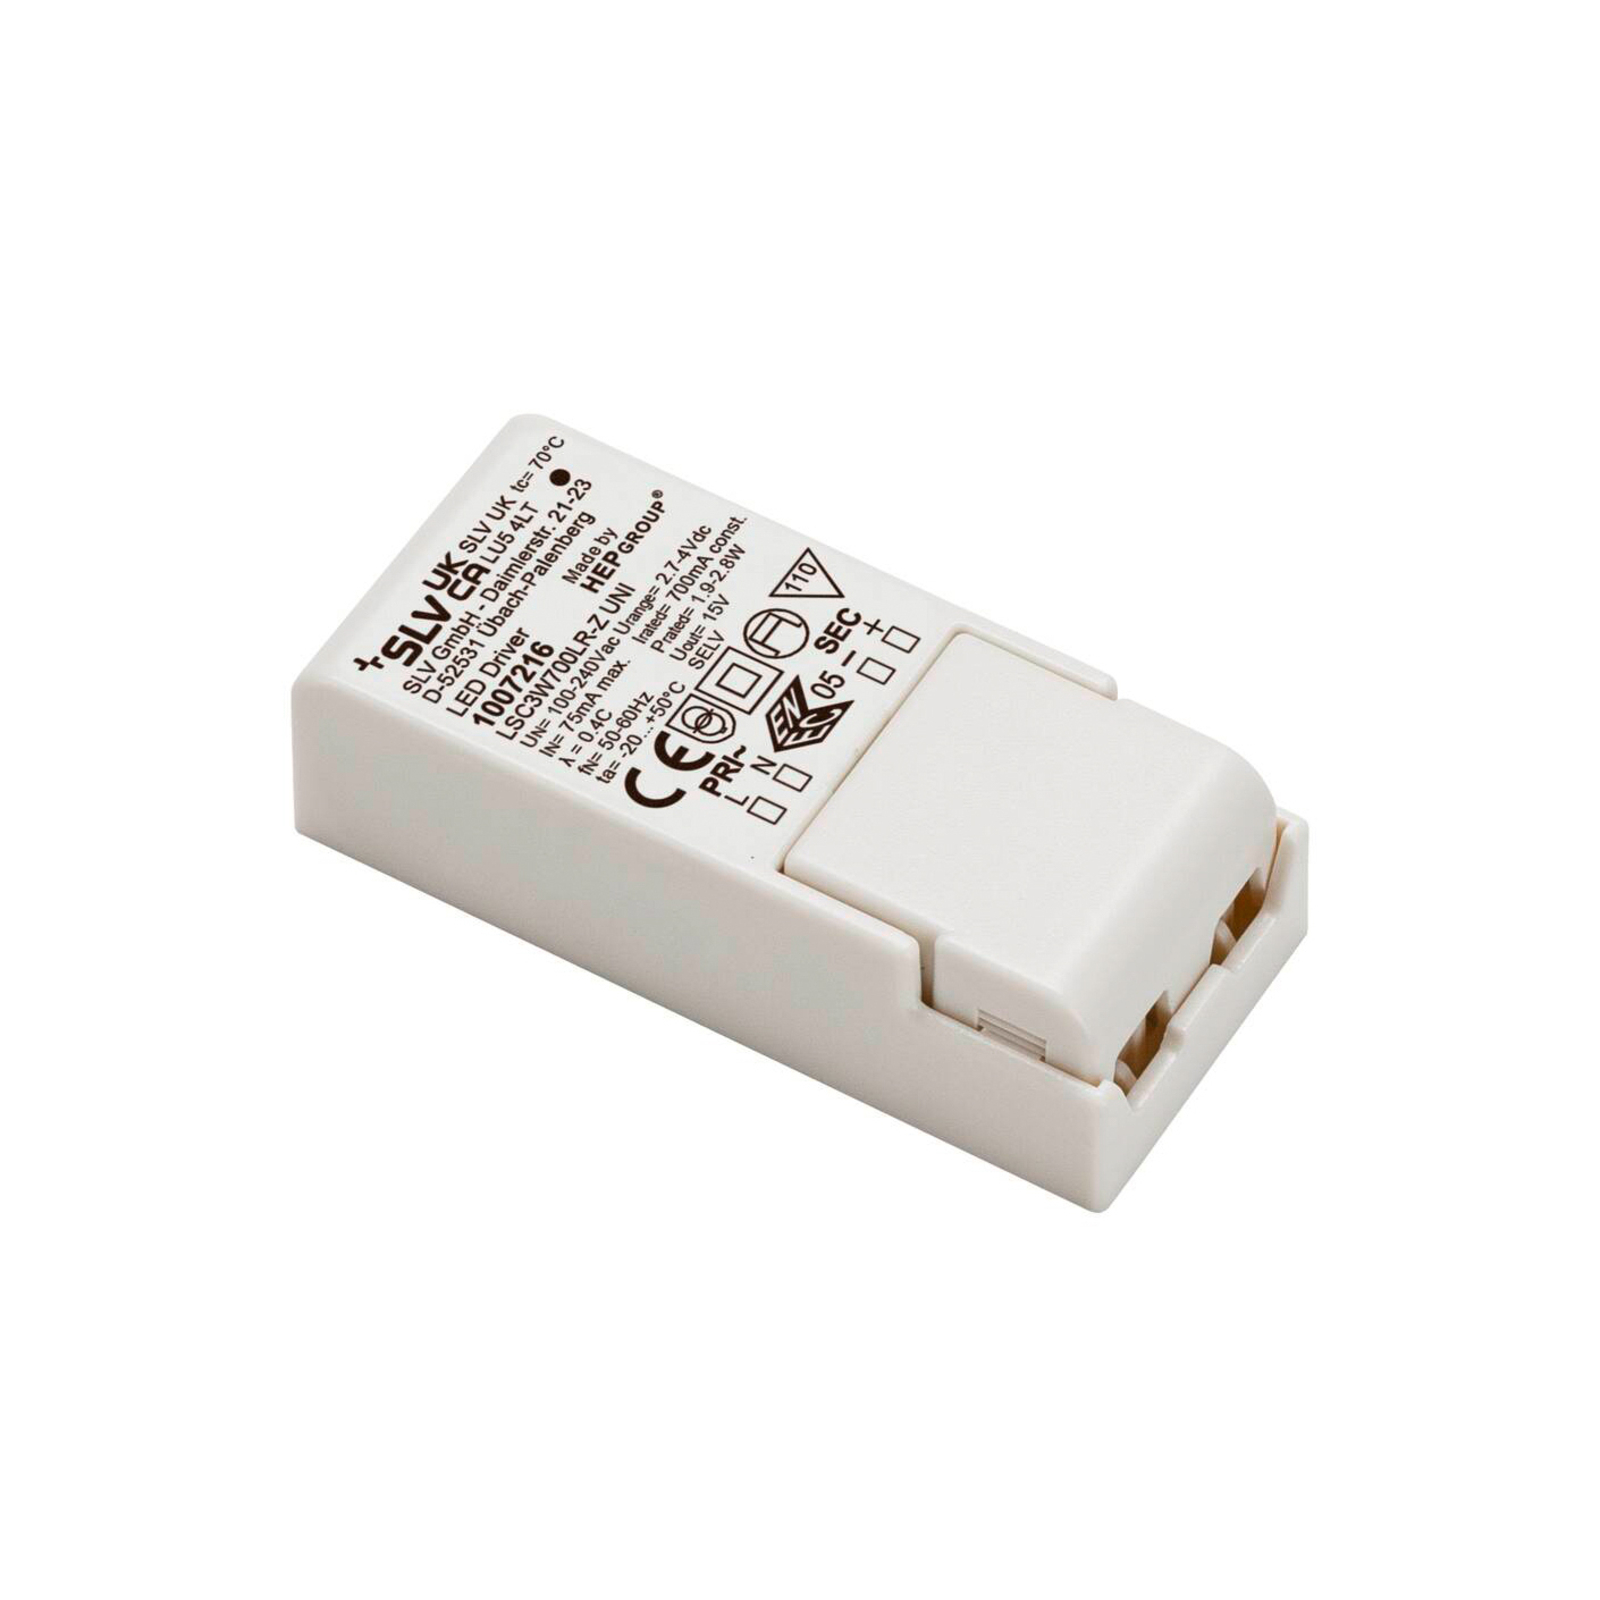 SLV LED driver 1.9 - 2.8 W, 700 mA, 2.7 - 4 V DC, dimmable